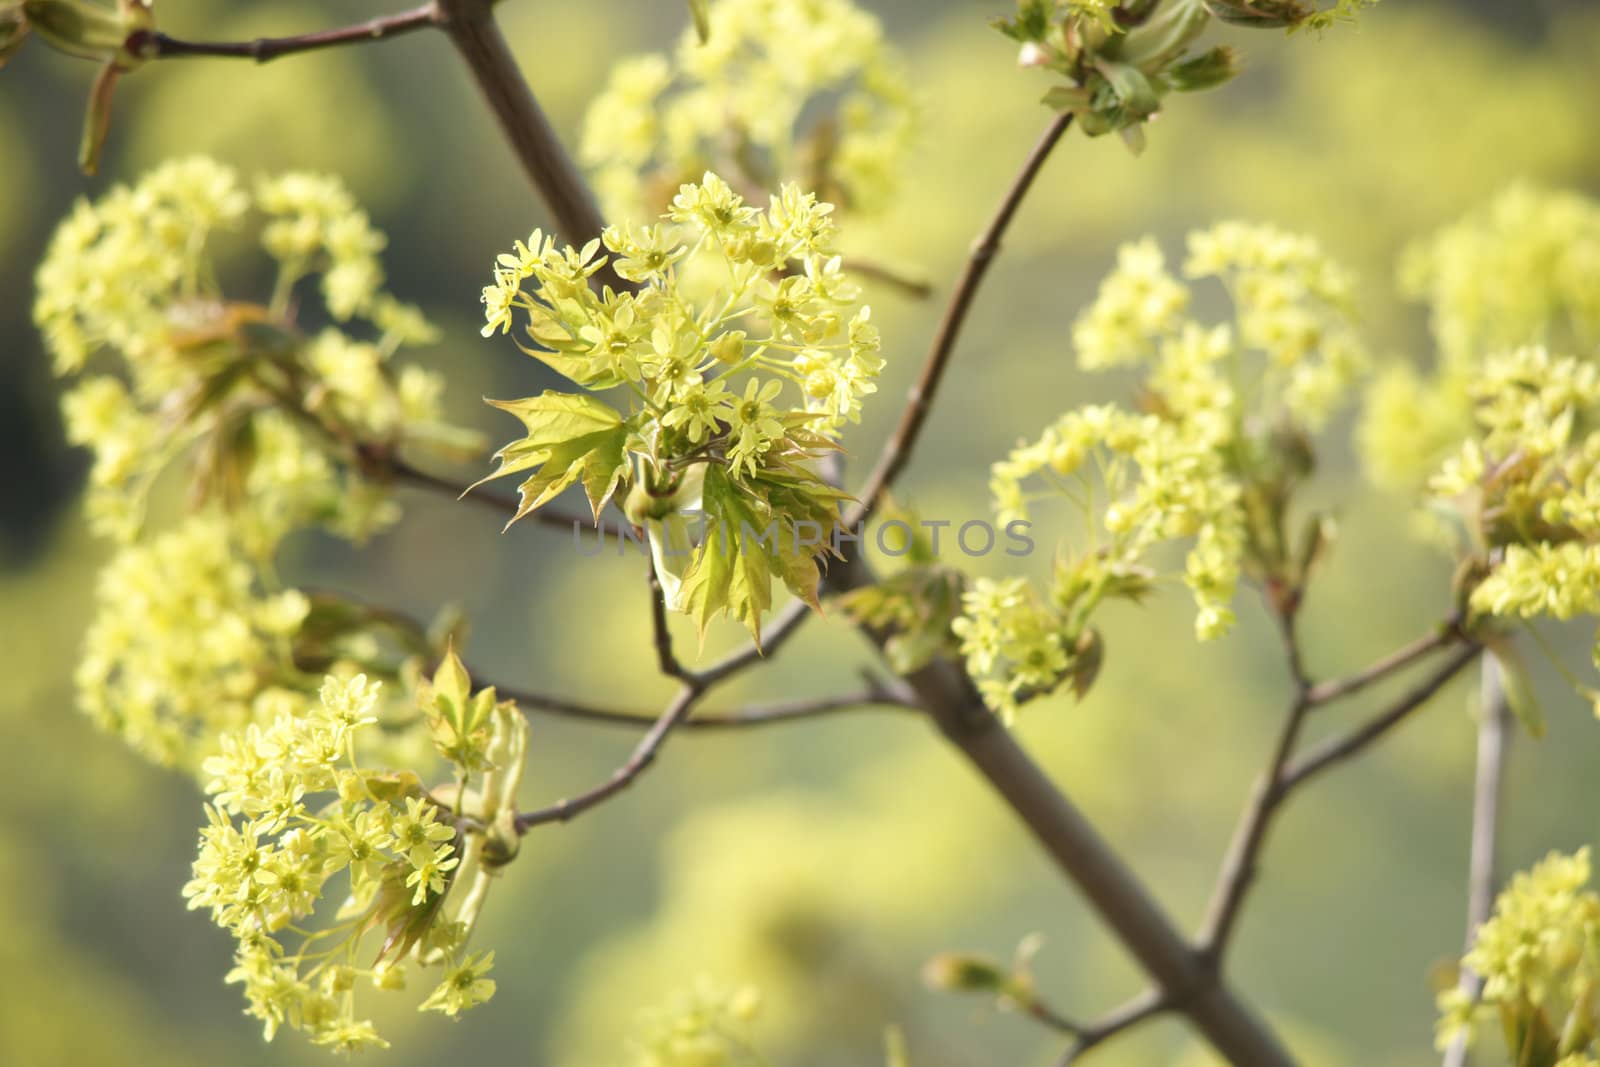 Flowers of maple tree by mulden